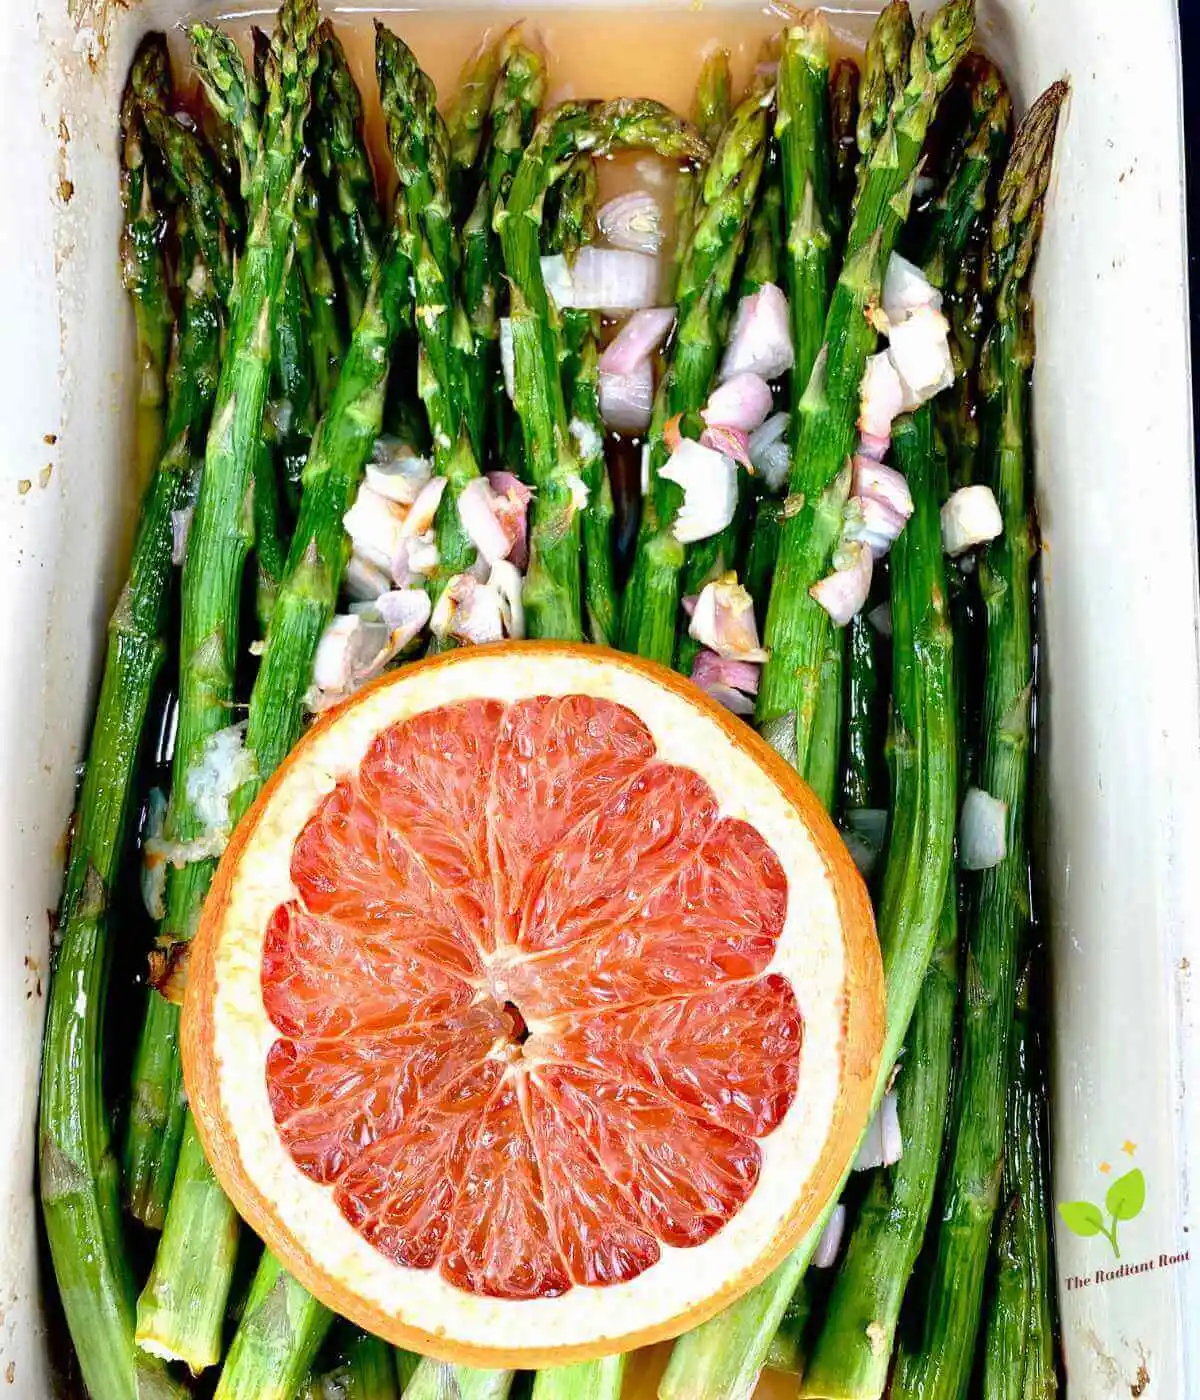 Asparagus with Shallots main photo: Close up photo of roasted asparagus with shallots in a white dish topped with a marinade of grapefruit juice, lemon juice, shallots, garlic, and extra virgin olive oil, topped with a grapefruit slice garnish. | asparagus roasted | The radiant Root